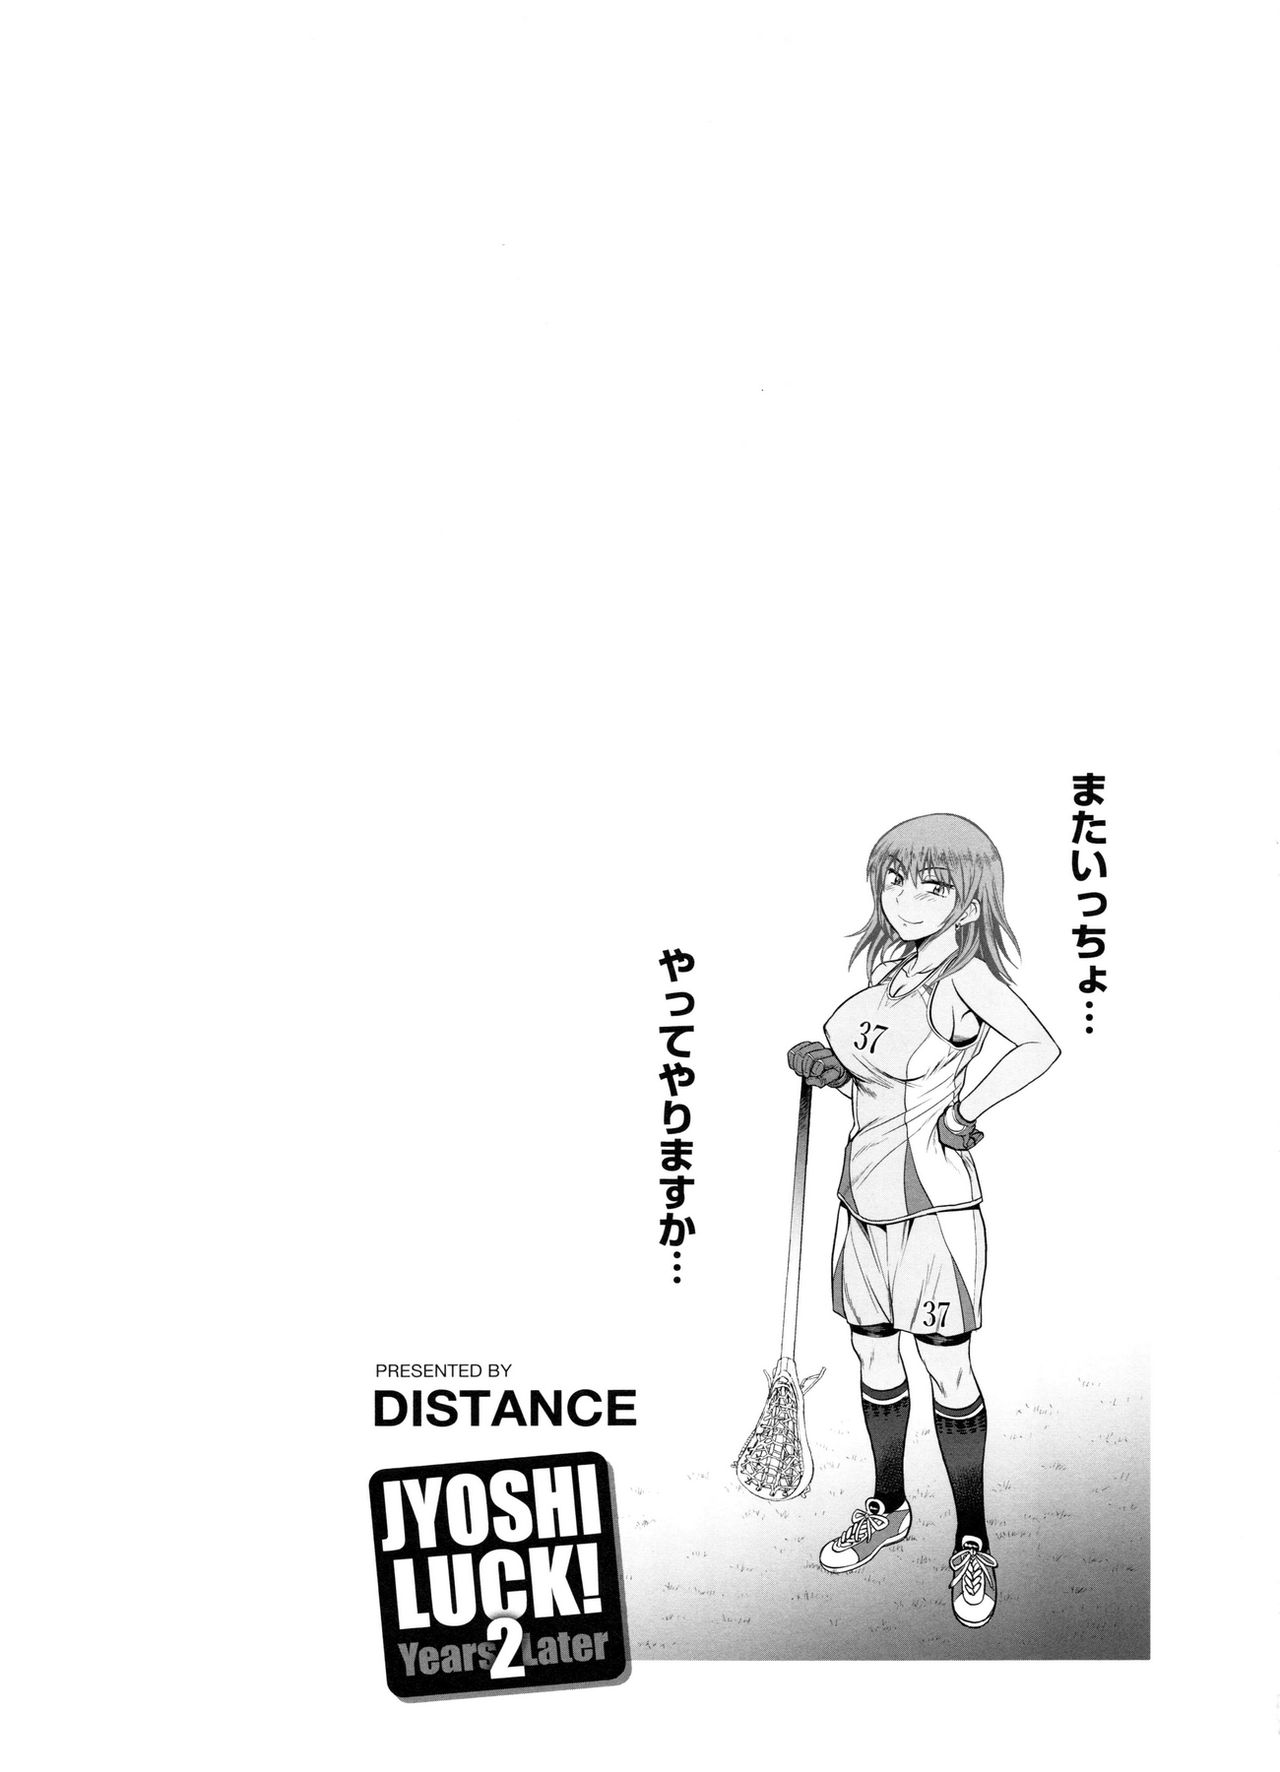 [DISTANCE] じょしラク！ 2 Years Later